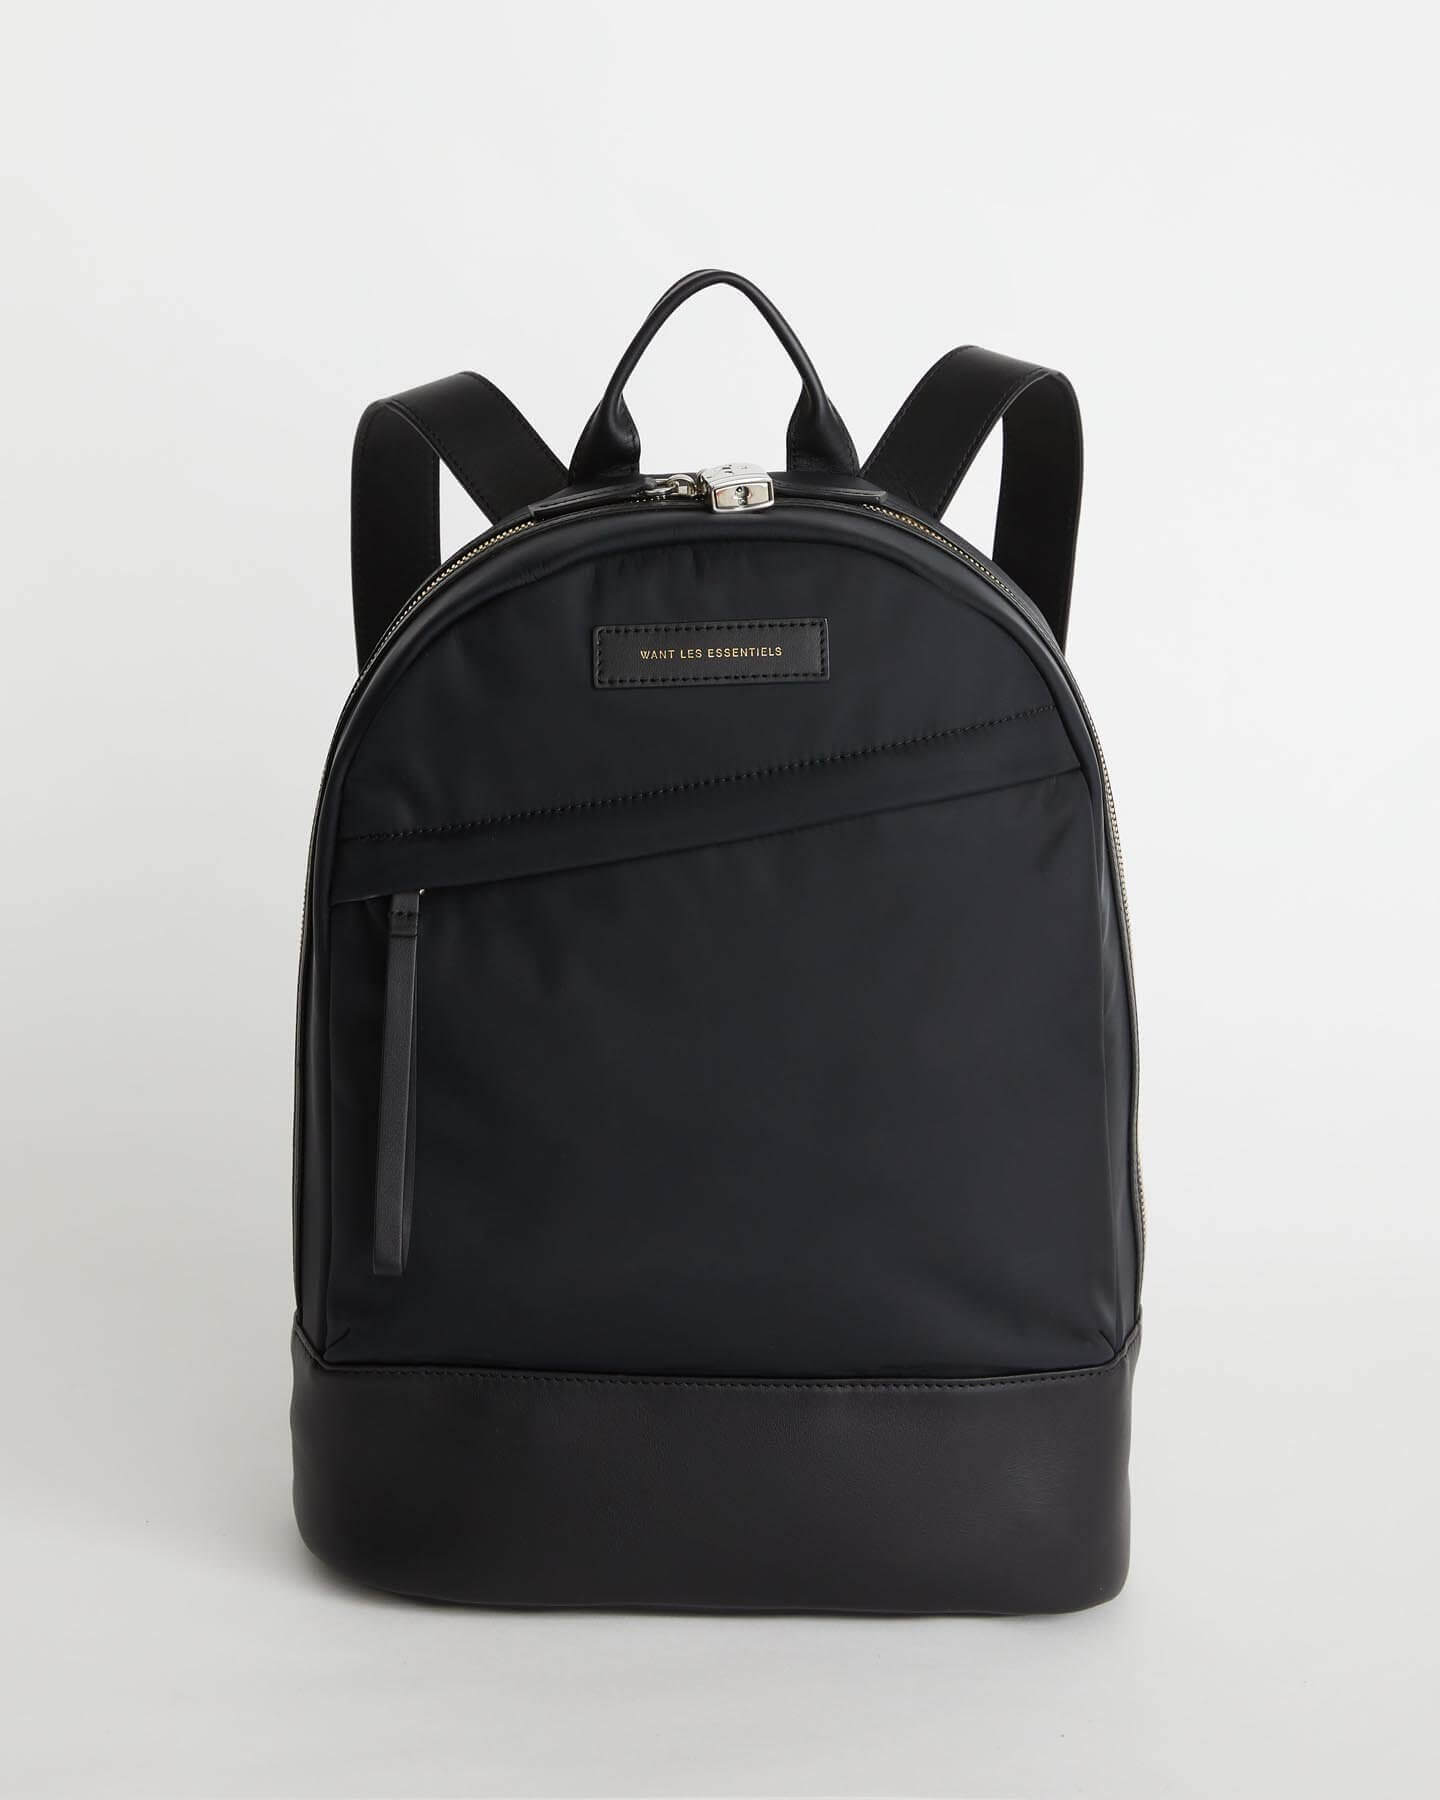 Backpacks for Women | Mini Backpacks | WANT Les Essentiels Tagged 